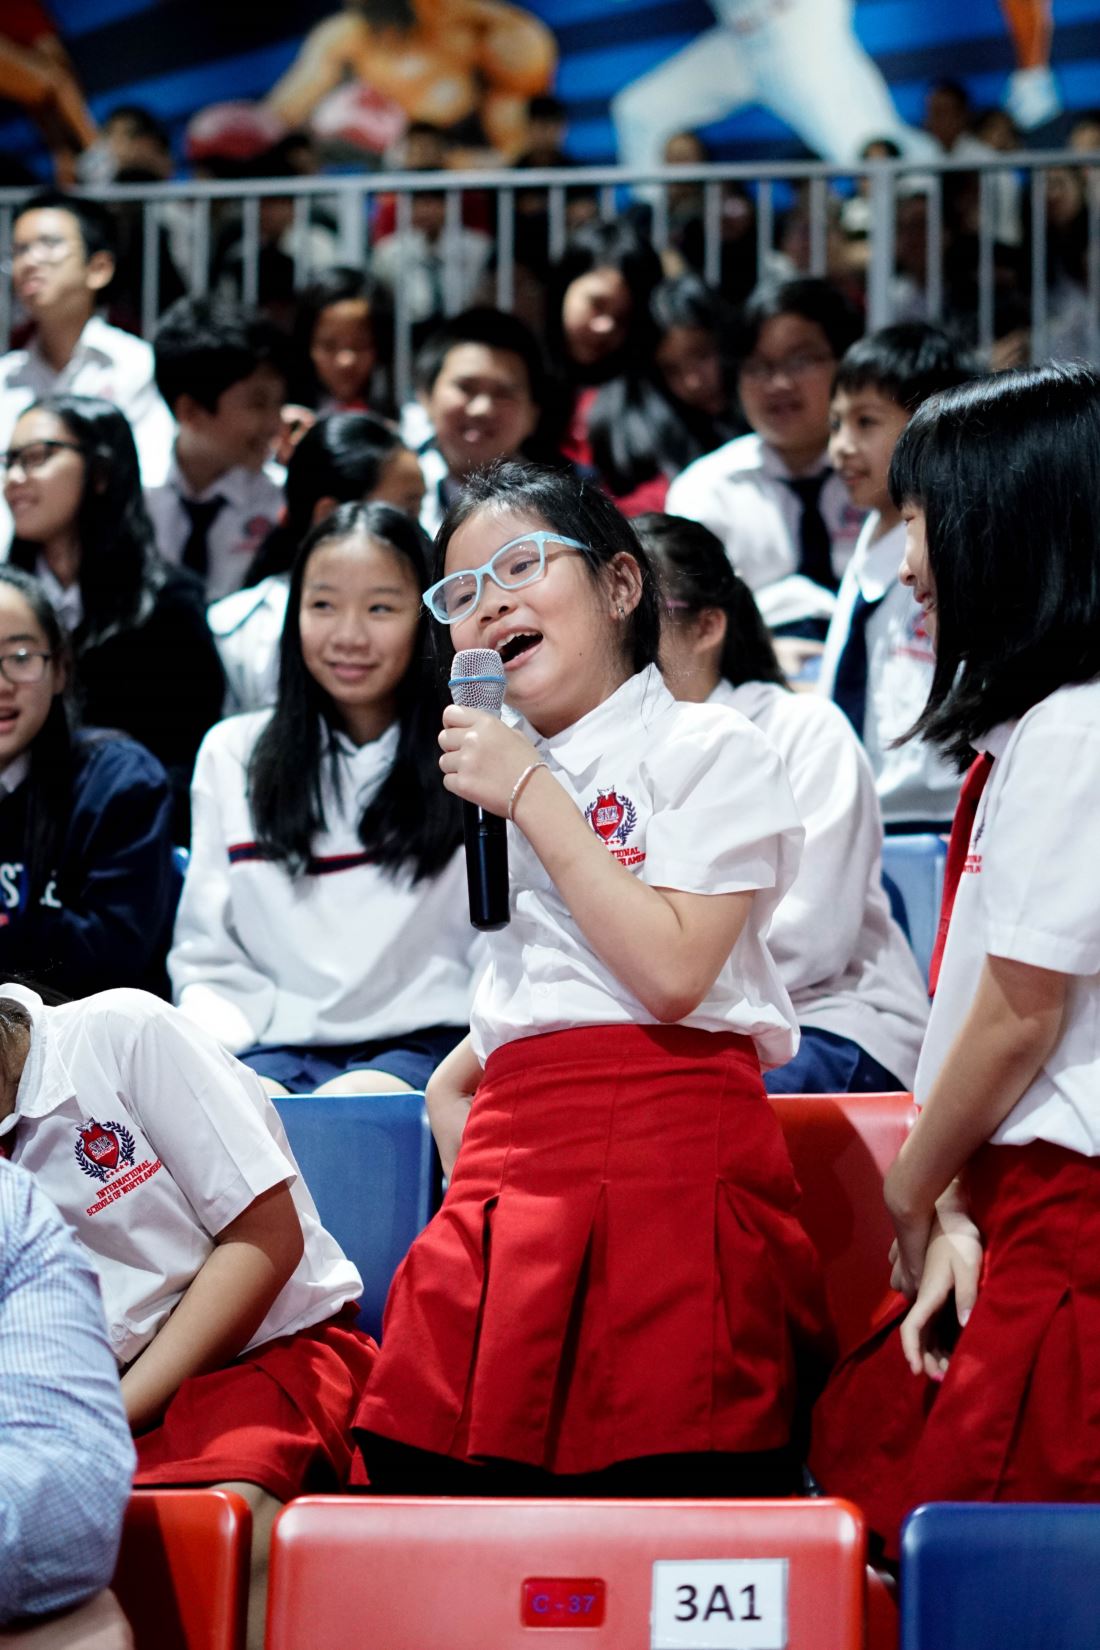 Even the girl student also likes football and have the question to Cong Vinh.